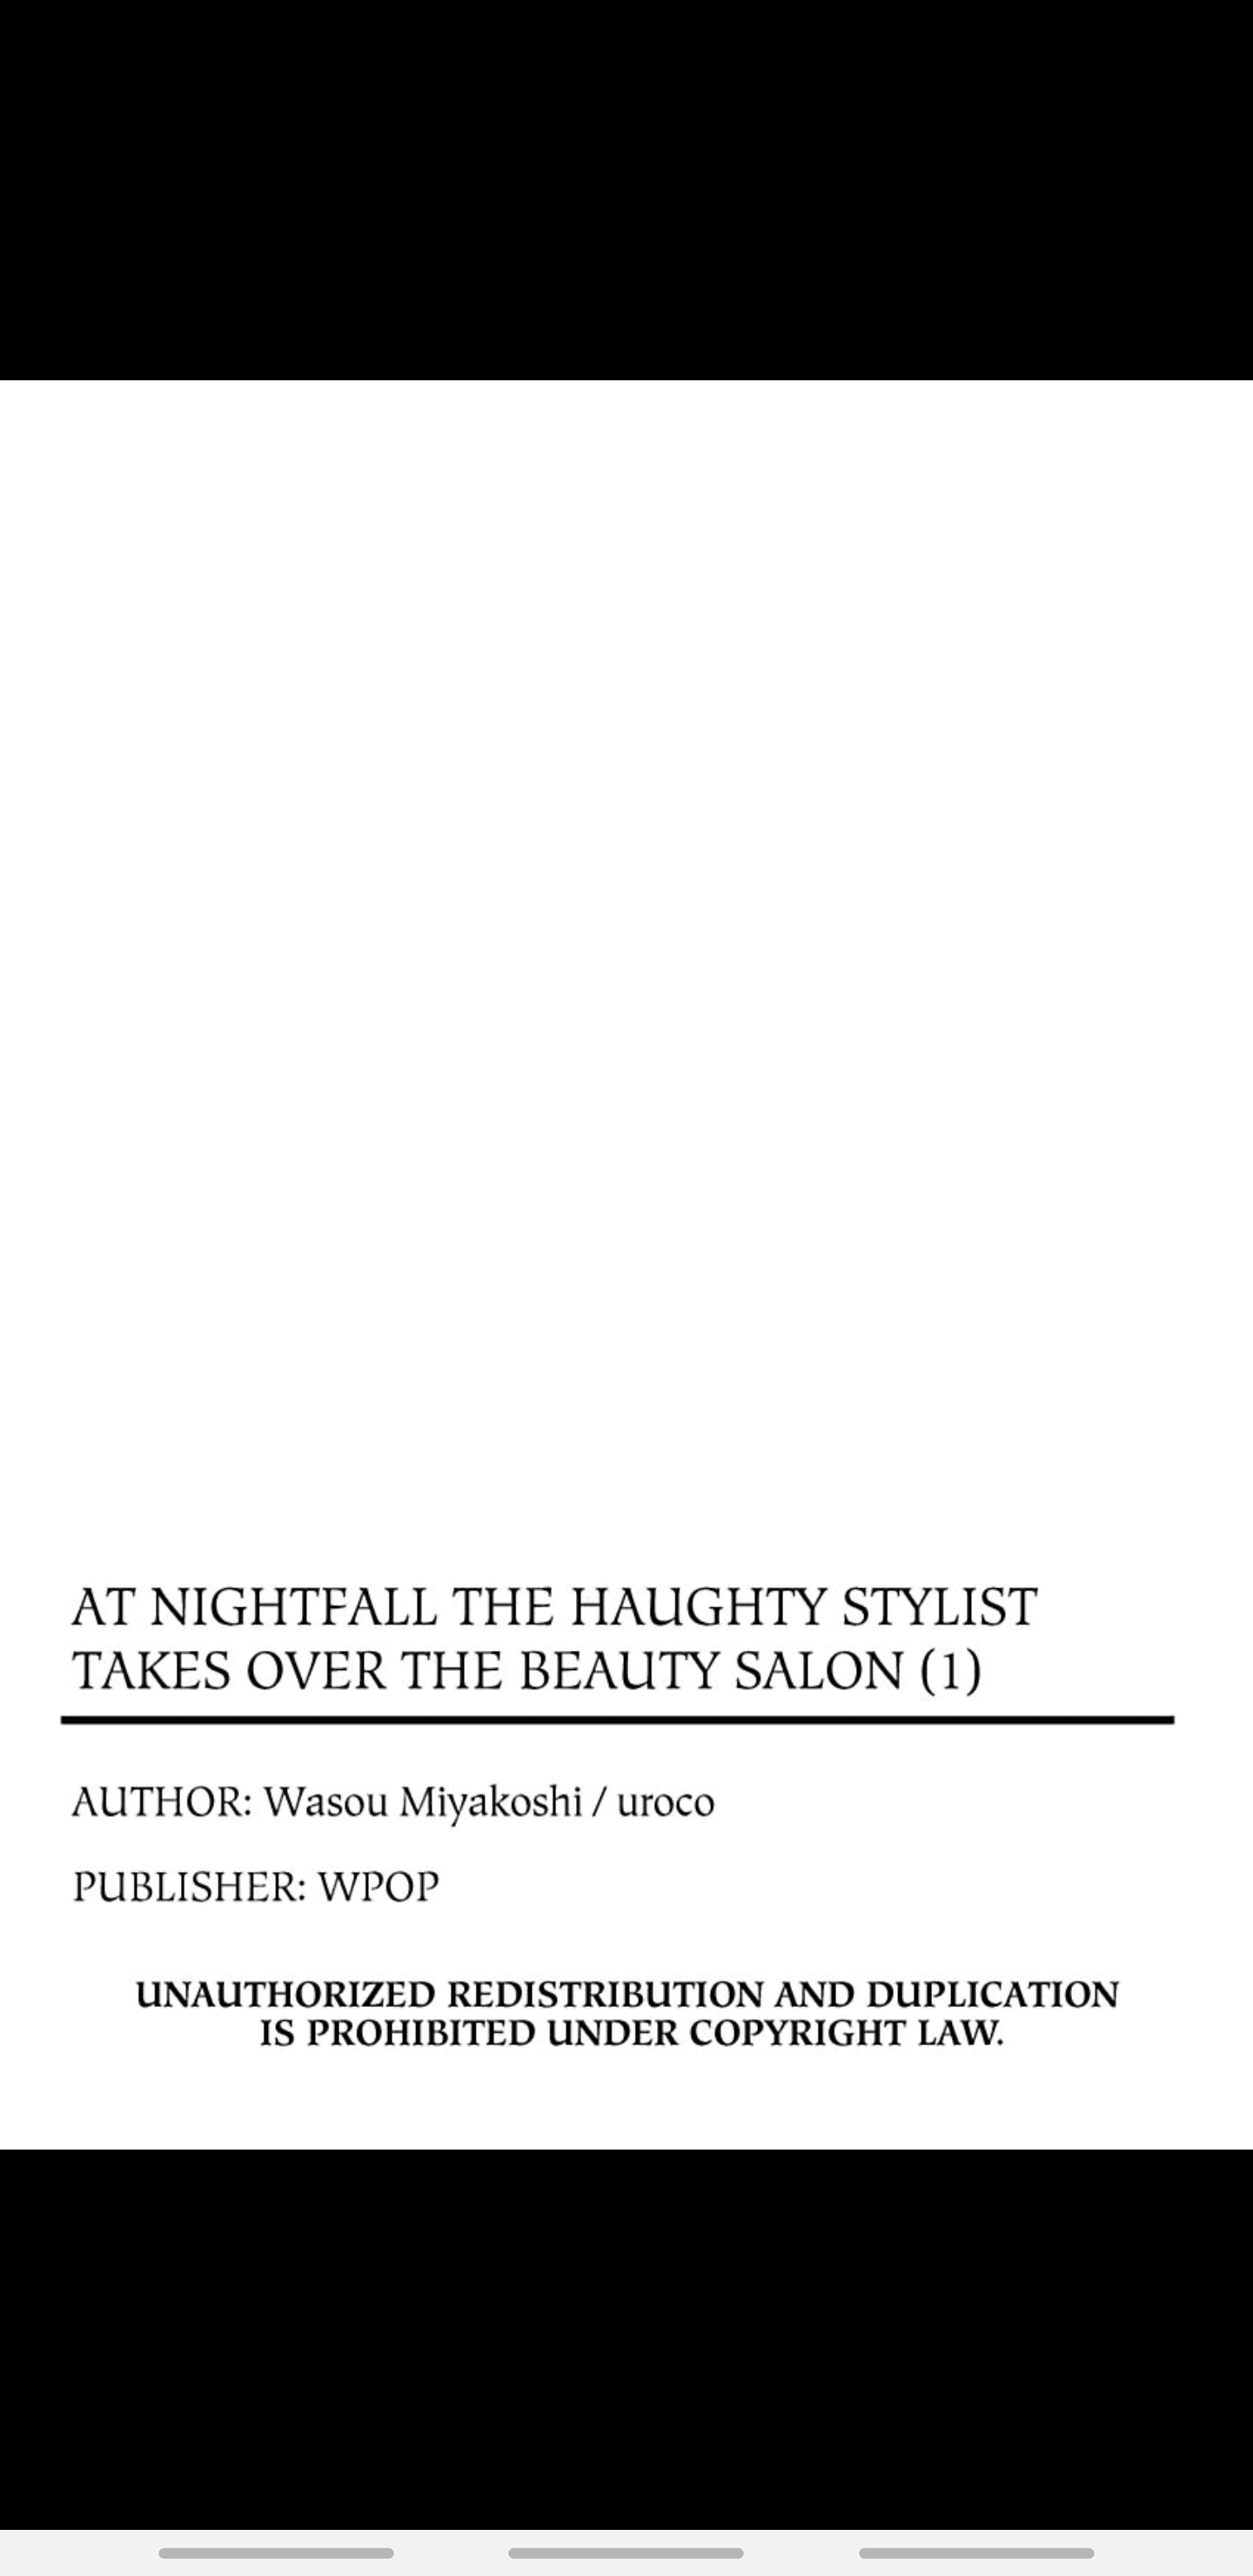 At Nightfall the Haughty Stylist Takes over the Beauty Salon Ch.1